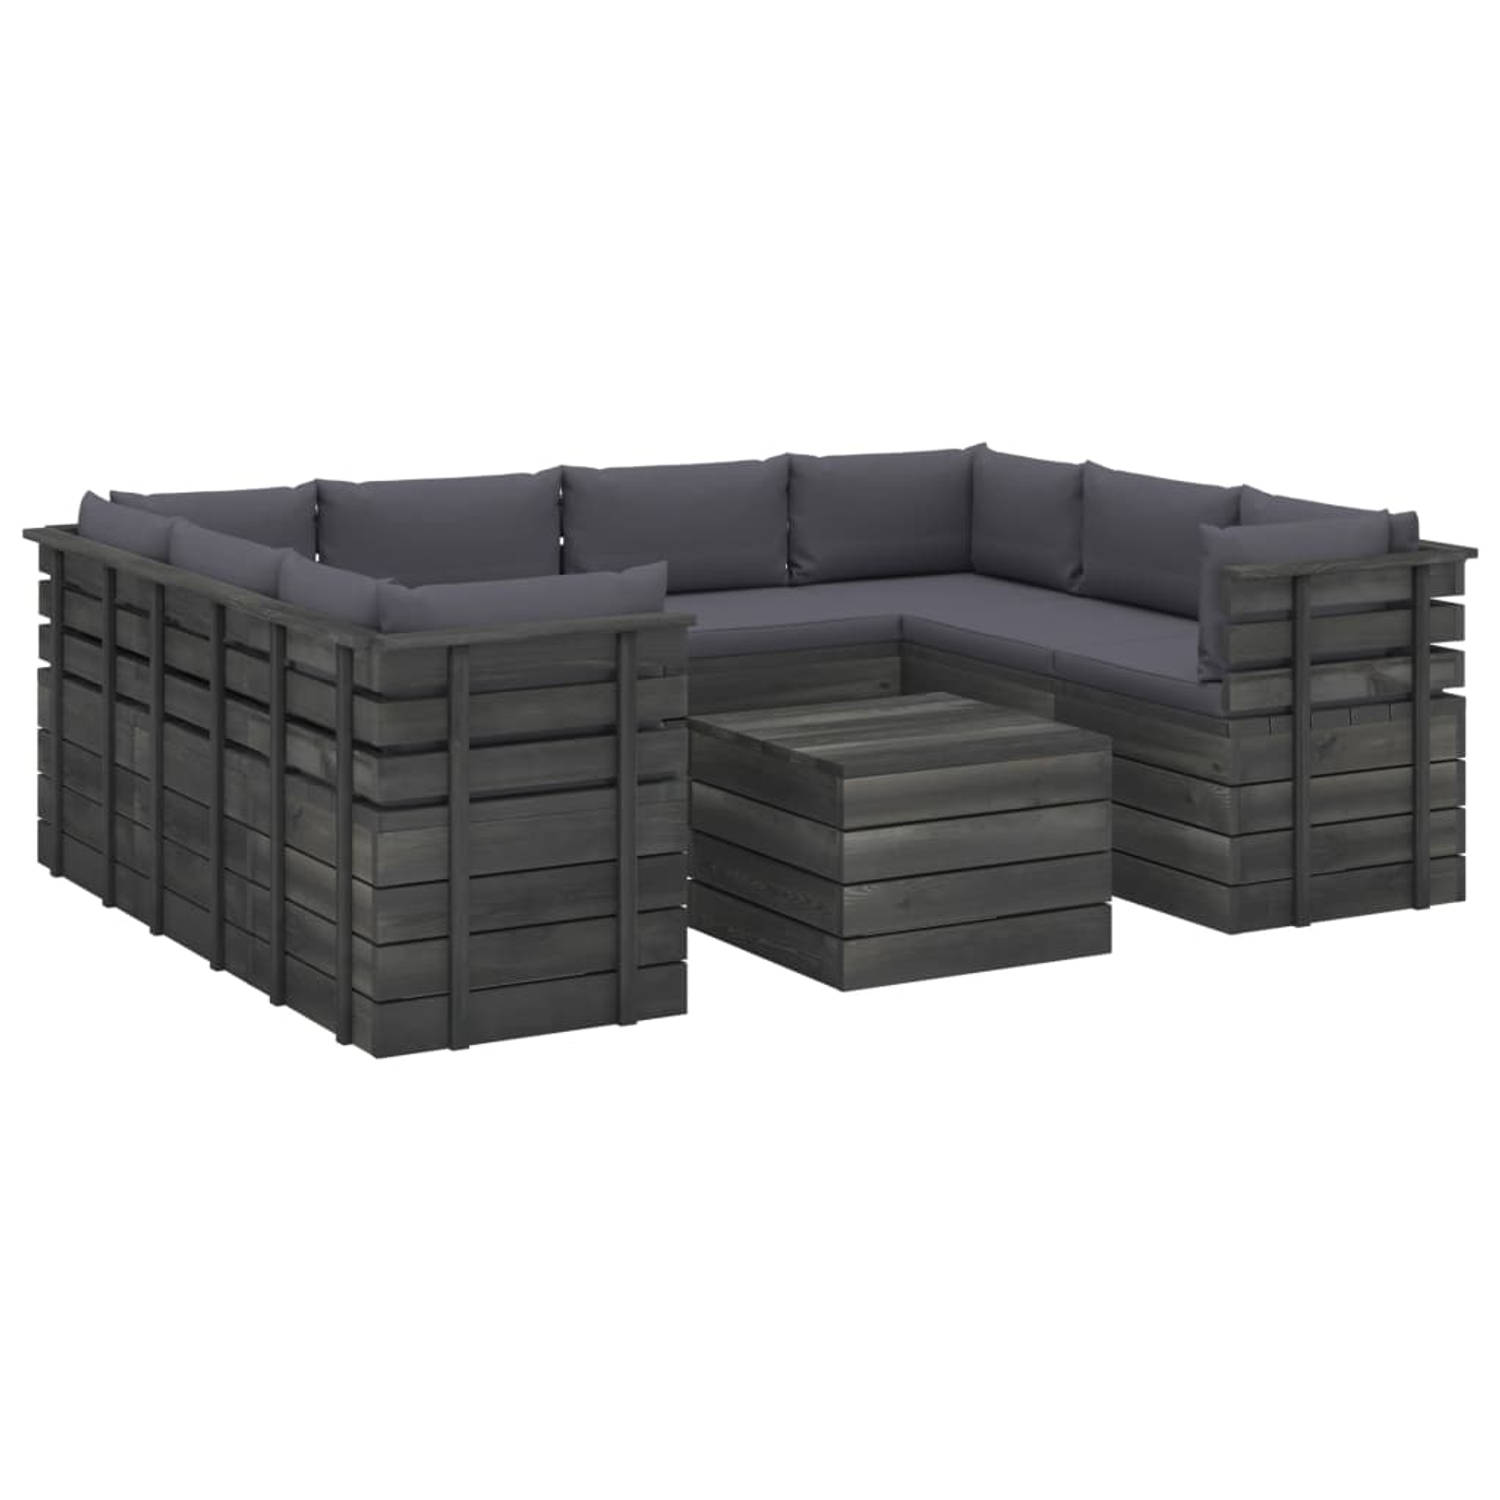 The Living Store Tuinset - Pallet - Hout - Grenenhout - Antraciet - 60x65x71.5 (BxDxH) - 100% polyester